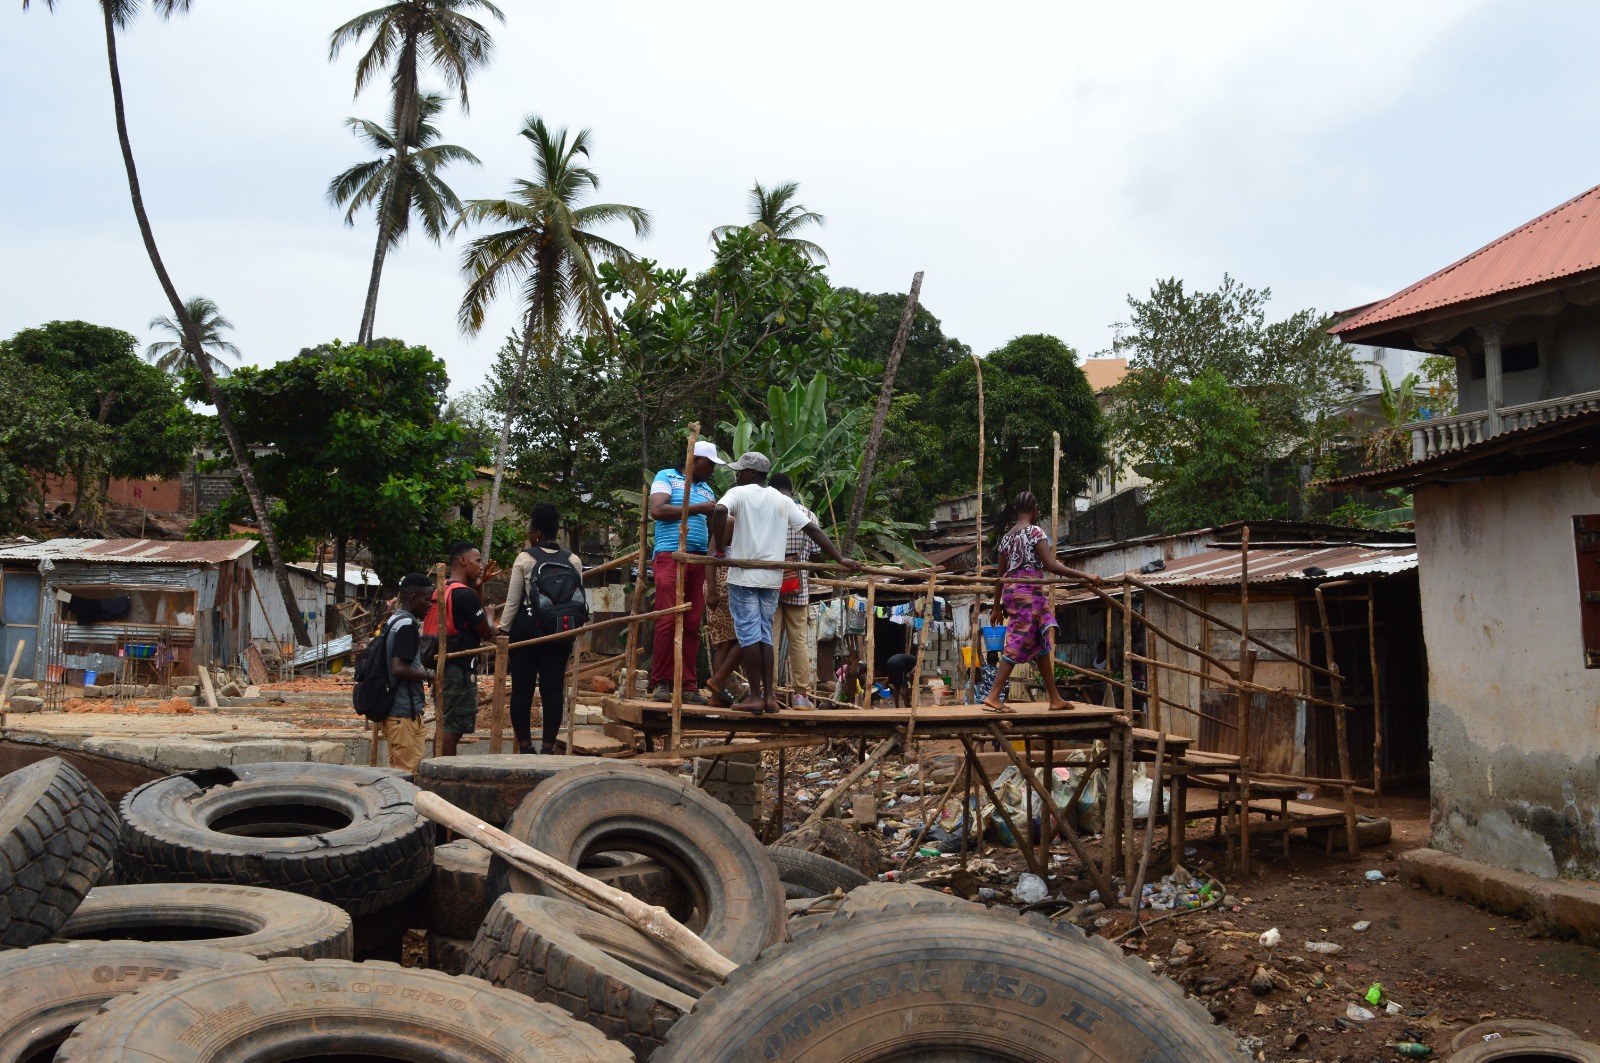 Mapping informal settlements in Sierra Leone: Researchers and co-researchers experiences in mapping urban spaces